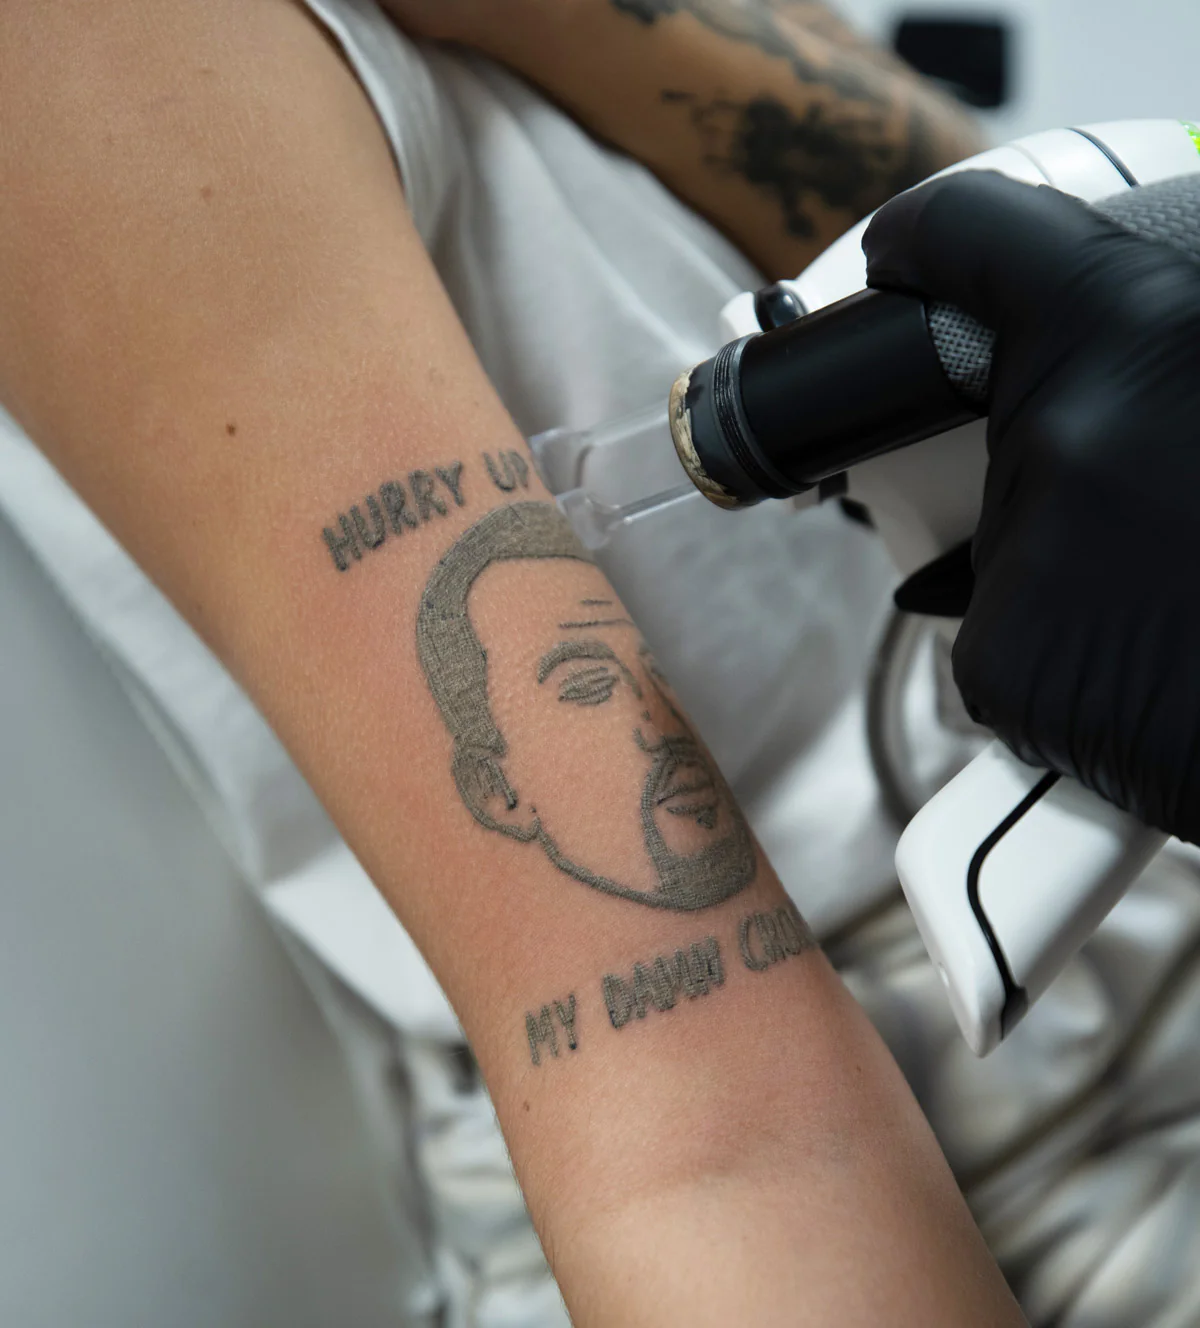 Tattoo removal studio will remove Kanye West ink for free